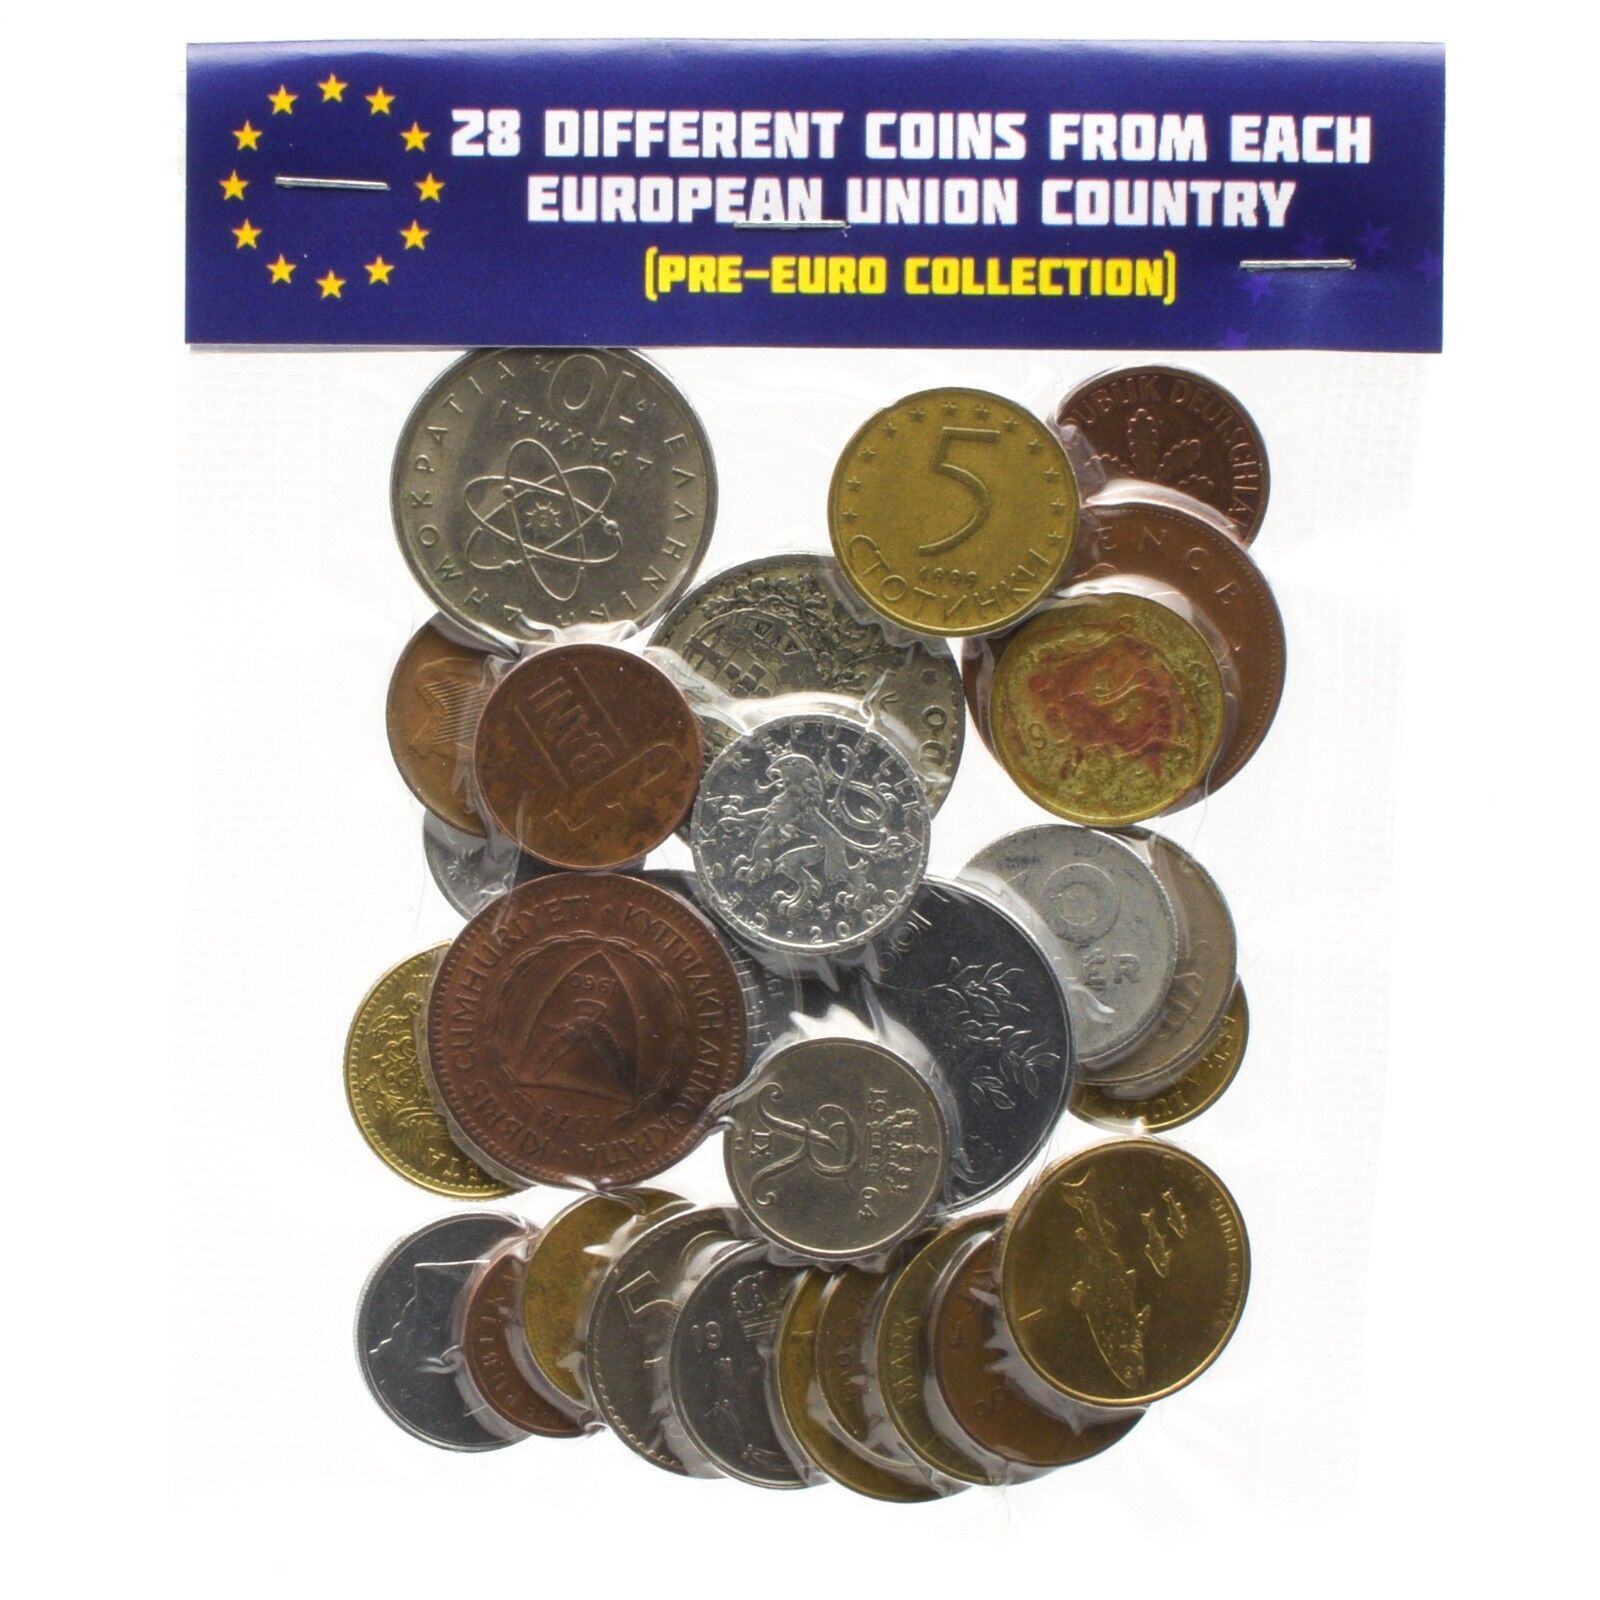 LOT OF 28 DIFFERENT COINS FROM EACH EUROPEAN UNION COUNTRY (PRE-EURO COLLECTION) Без бренда - фотография #5